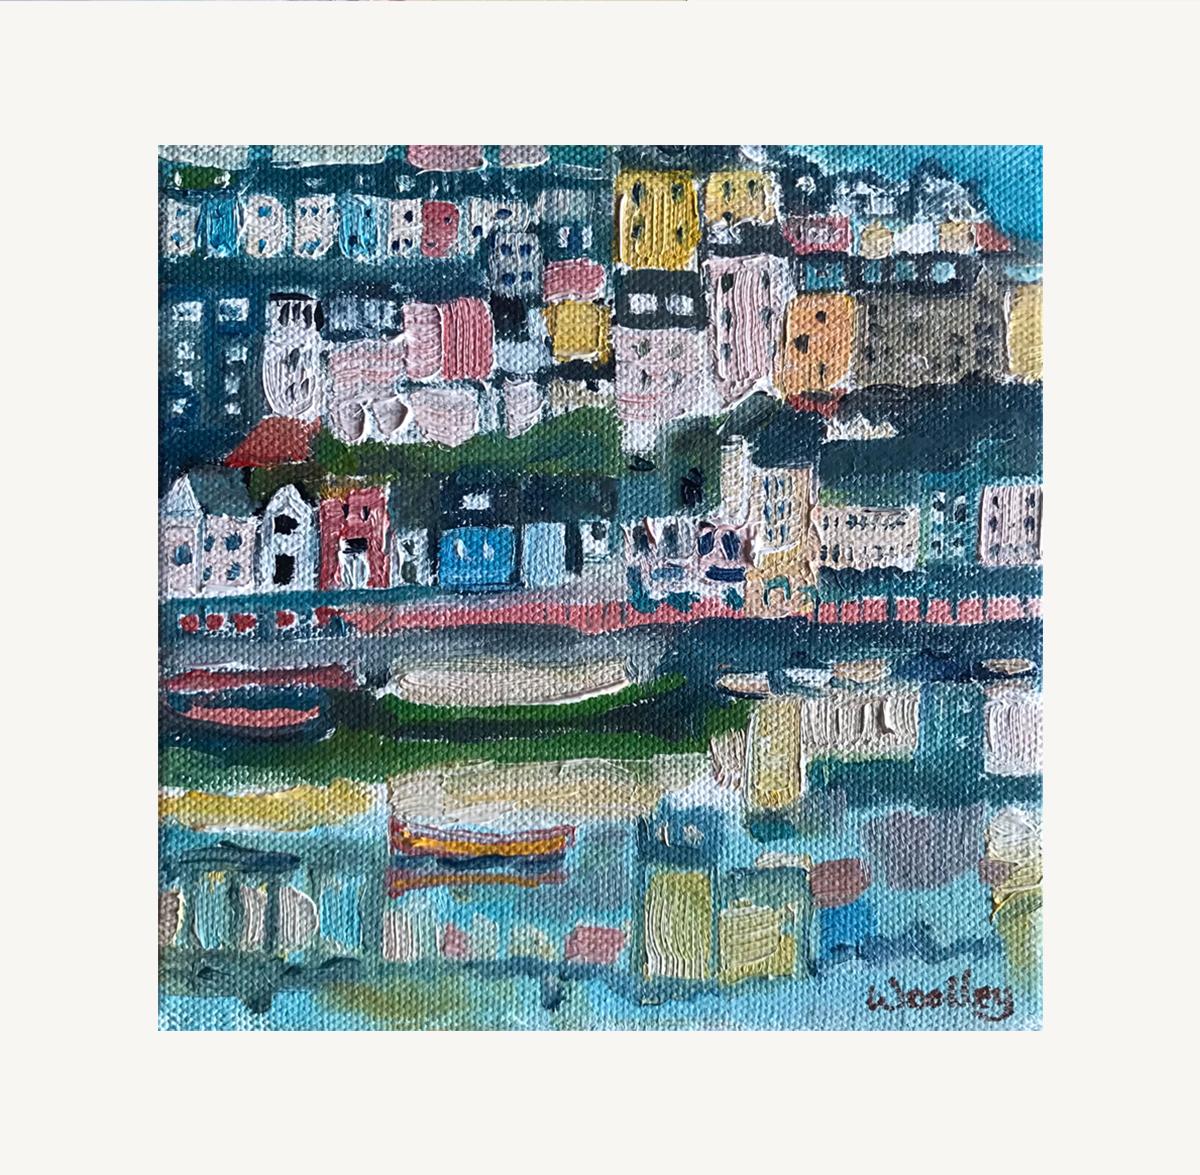 Brixham Harbour is an Original Painting by Eleanor Woolley. This painting is inspired by the Artist's summer vacations around Devon. Preliminary sketches were made of the harbour and the painting was finished in the artist's studio. The little